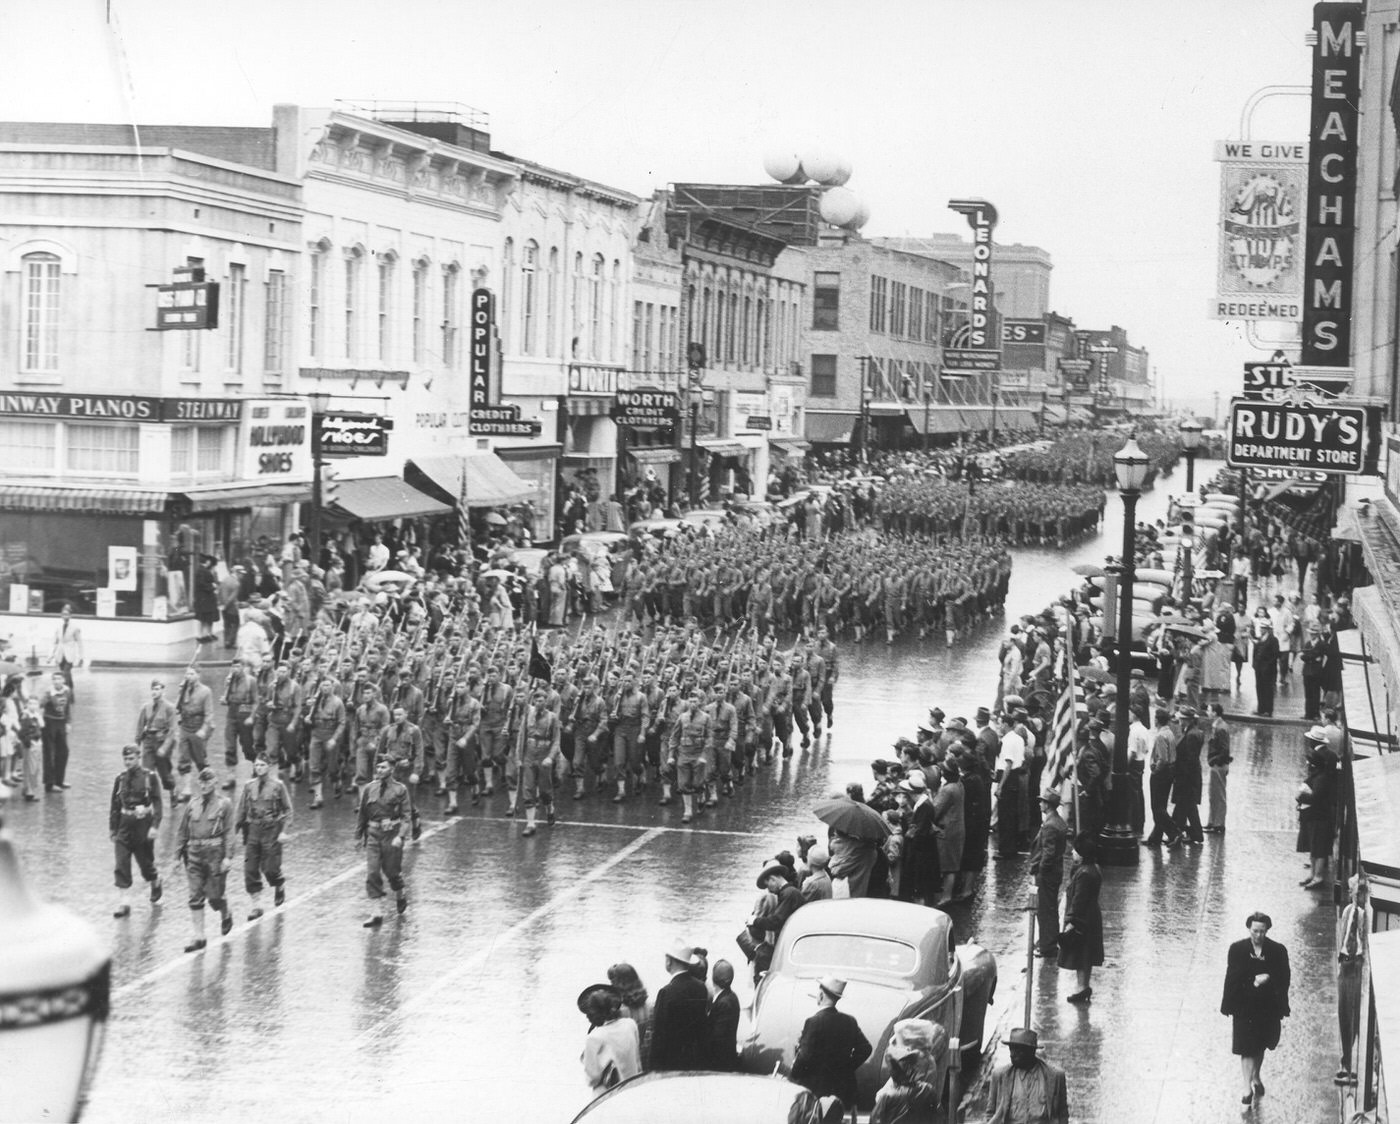 Military parade in downtown Fort Worth along Houston St. with Leonard's and Meacham department stores along the street, 1948